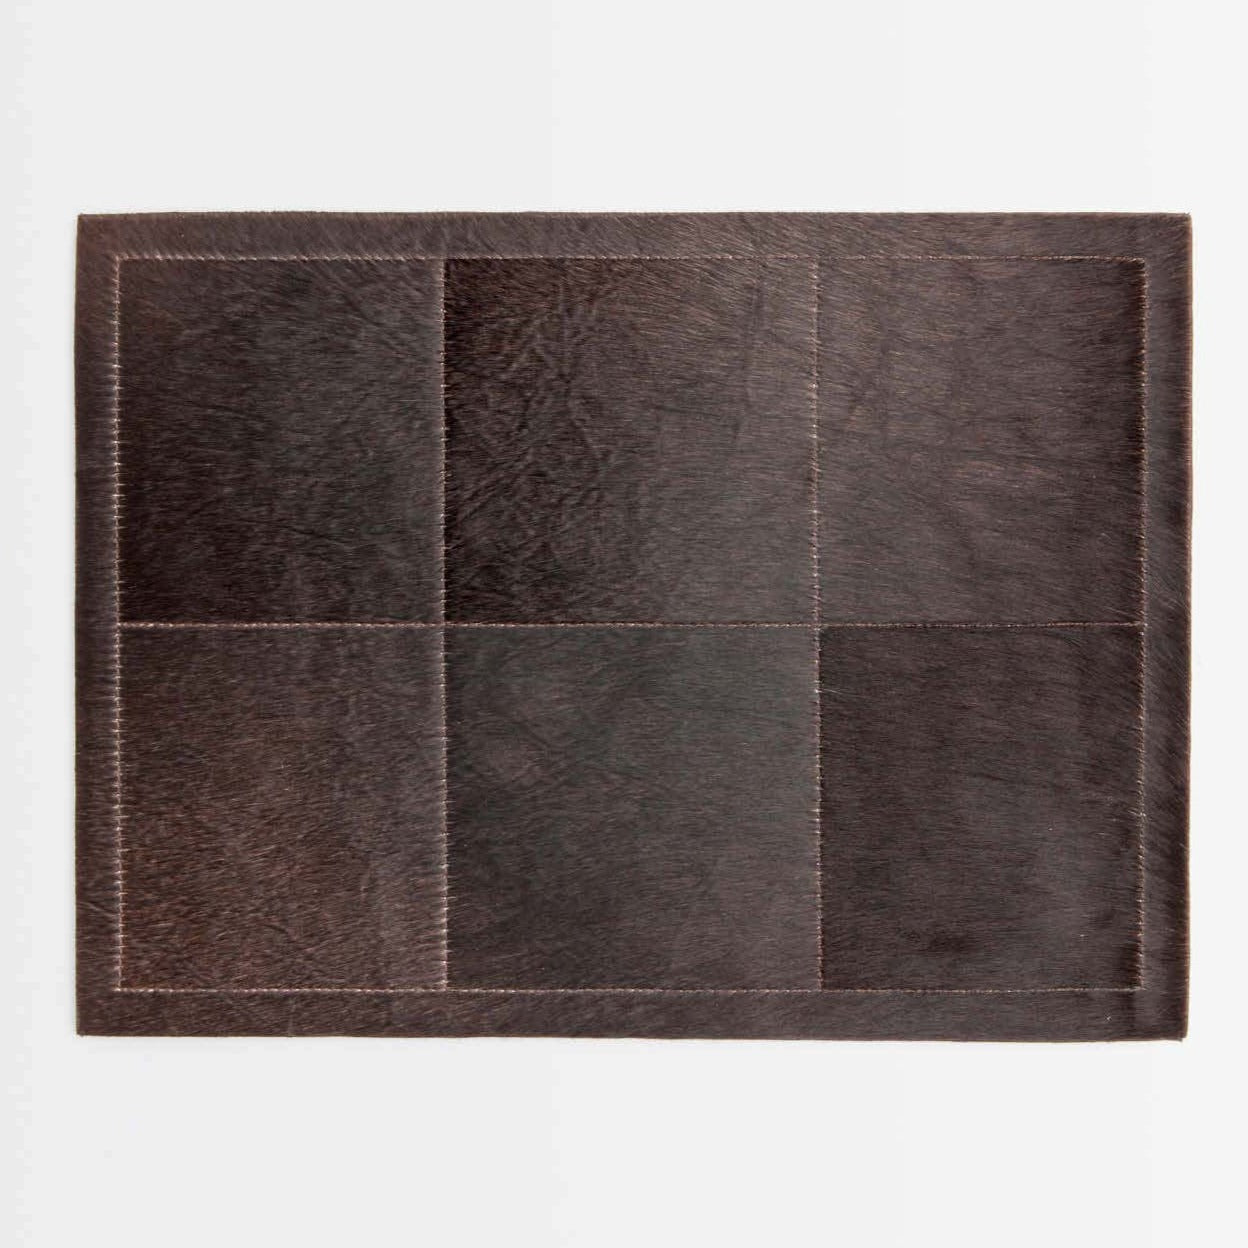 Tanner Placemat Brown Hair on Hide - multiple options